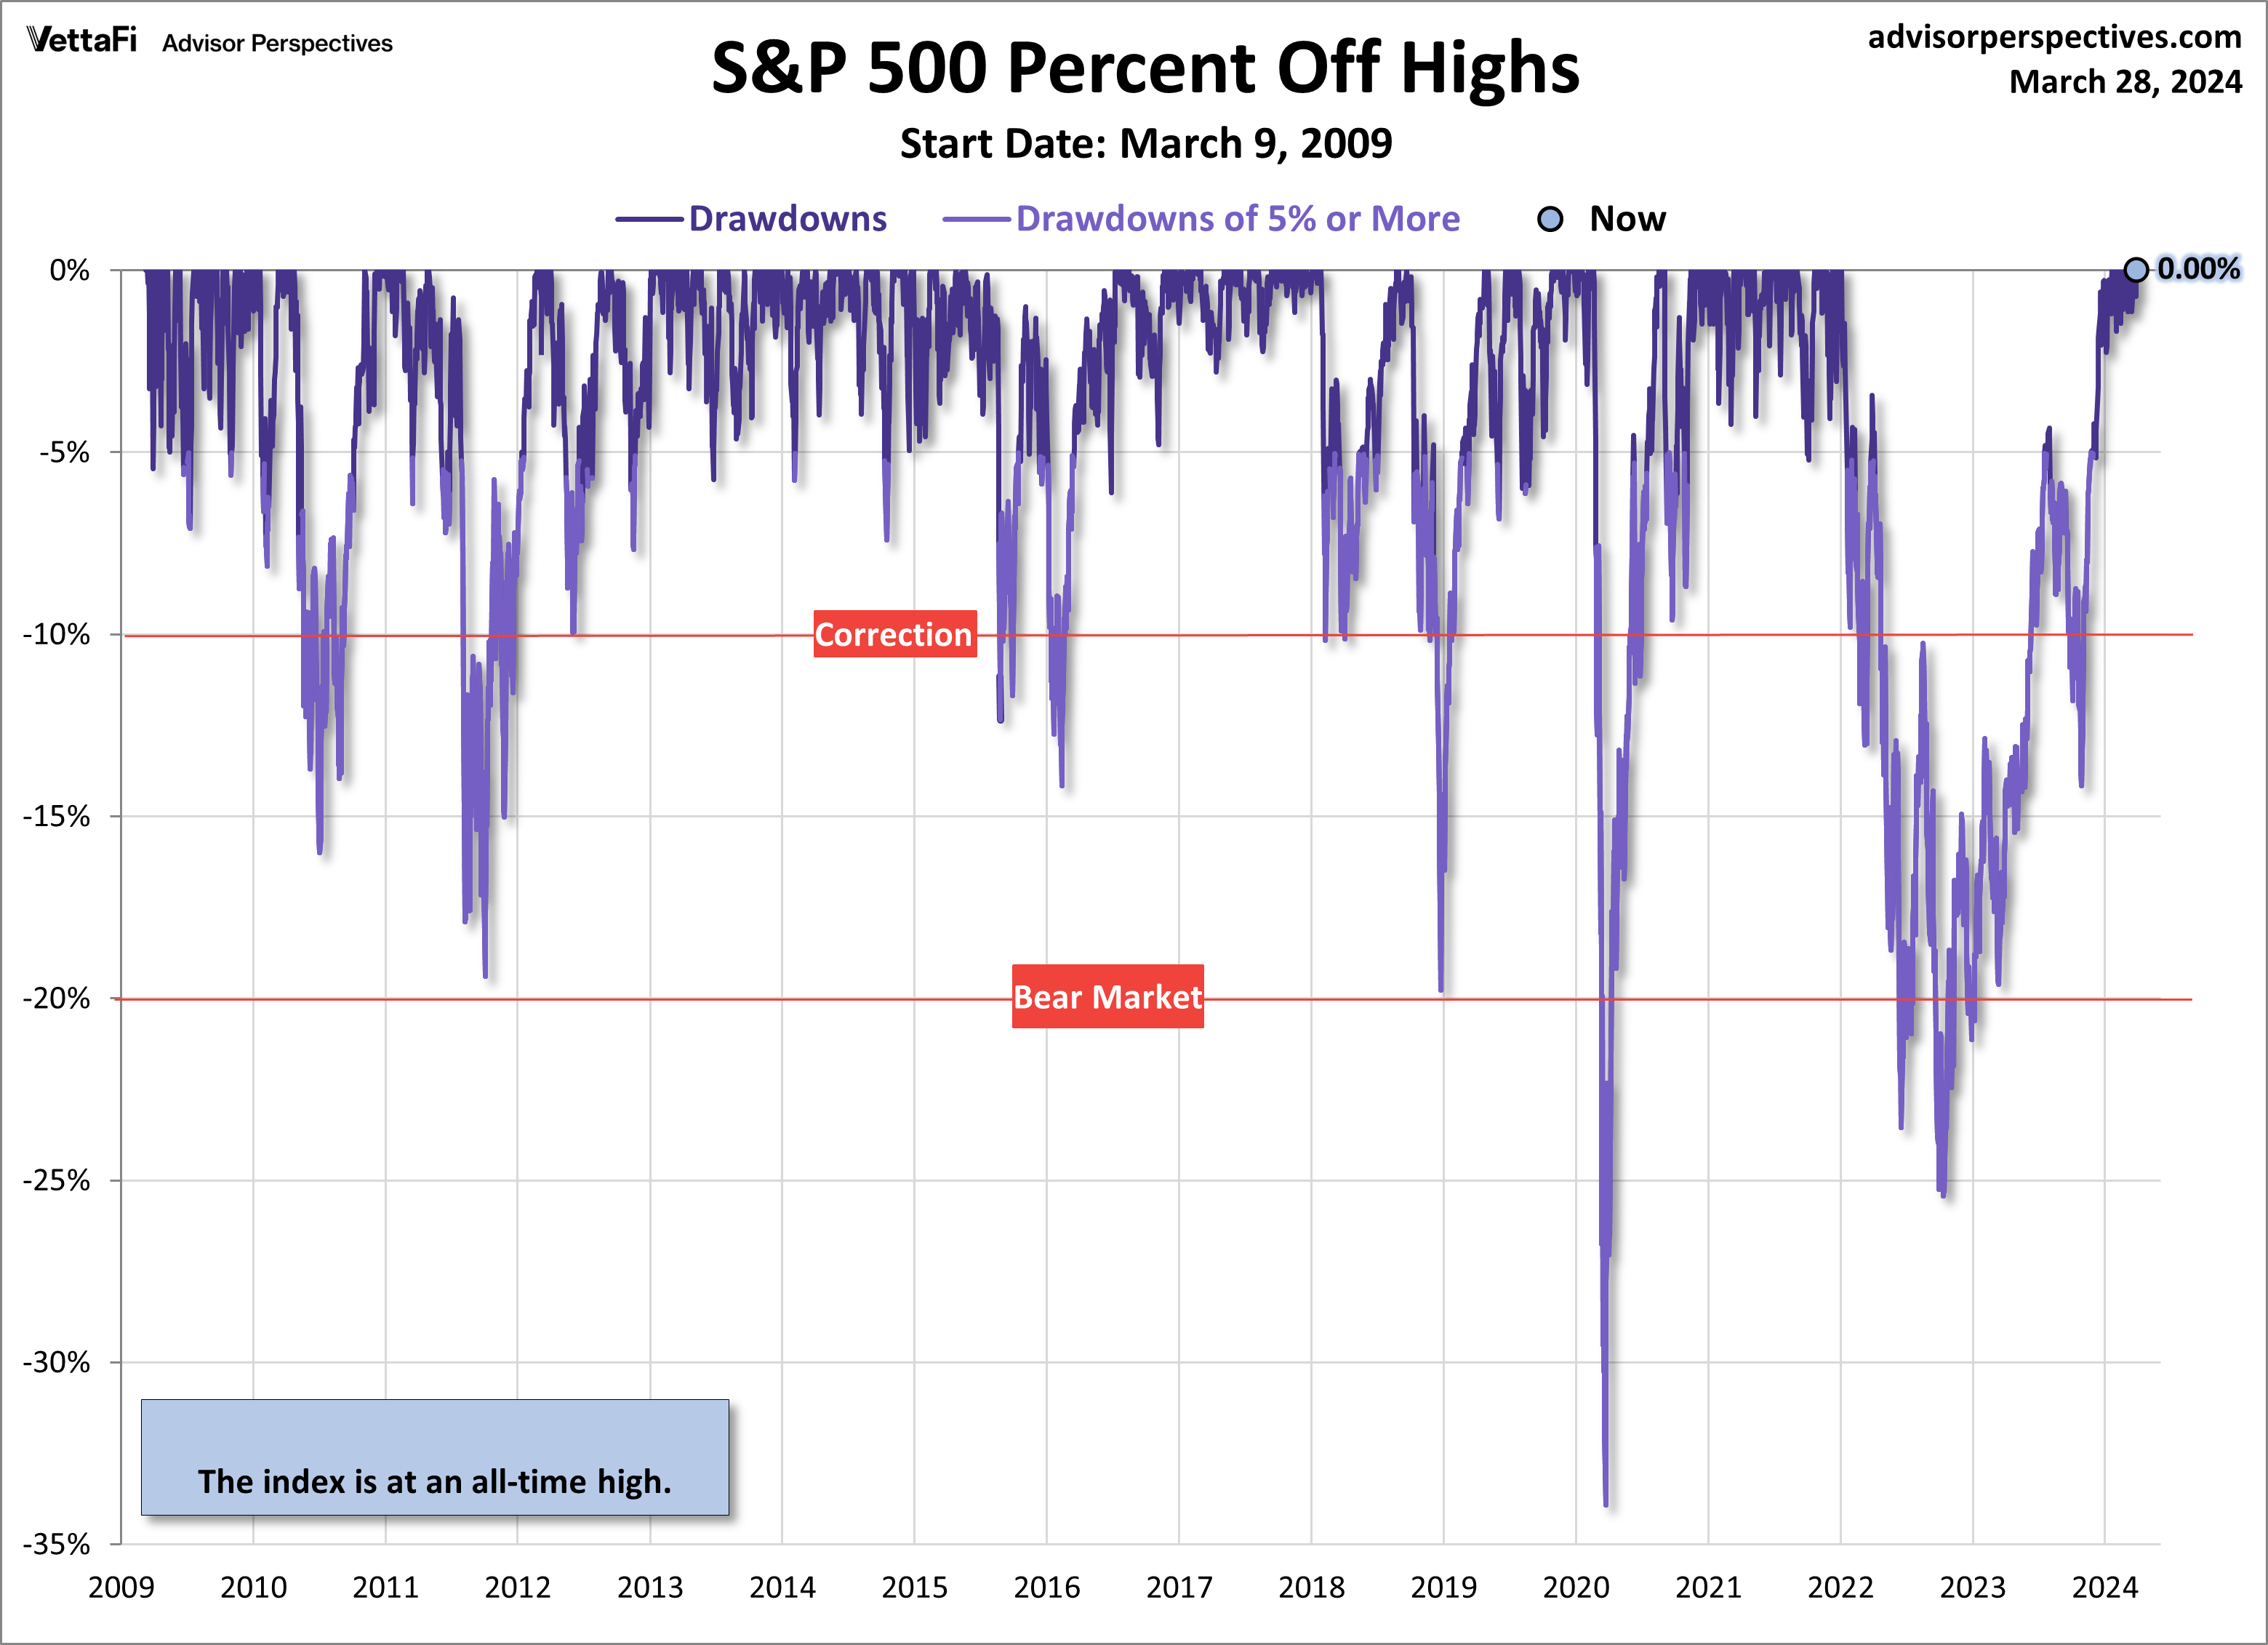 S&P 500 Percent Off Highs Since March 9 2009